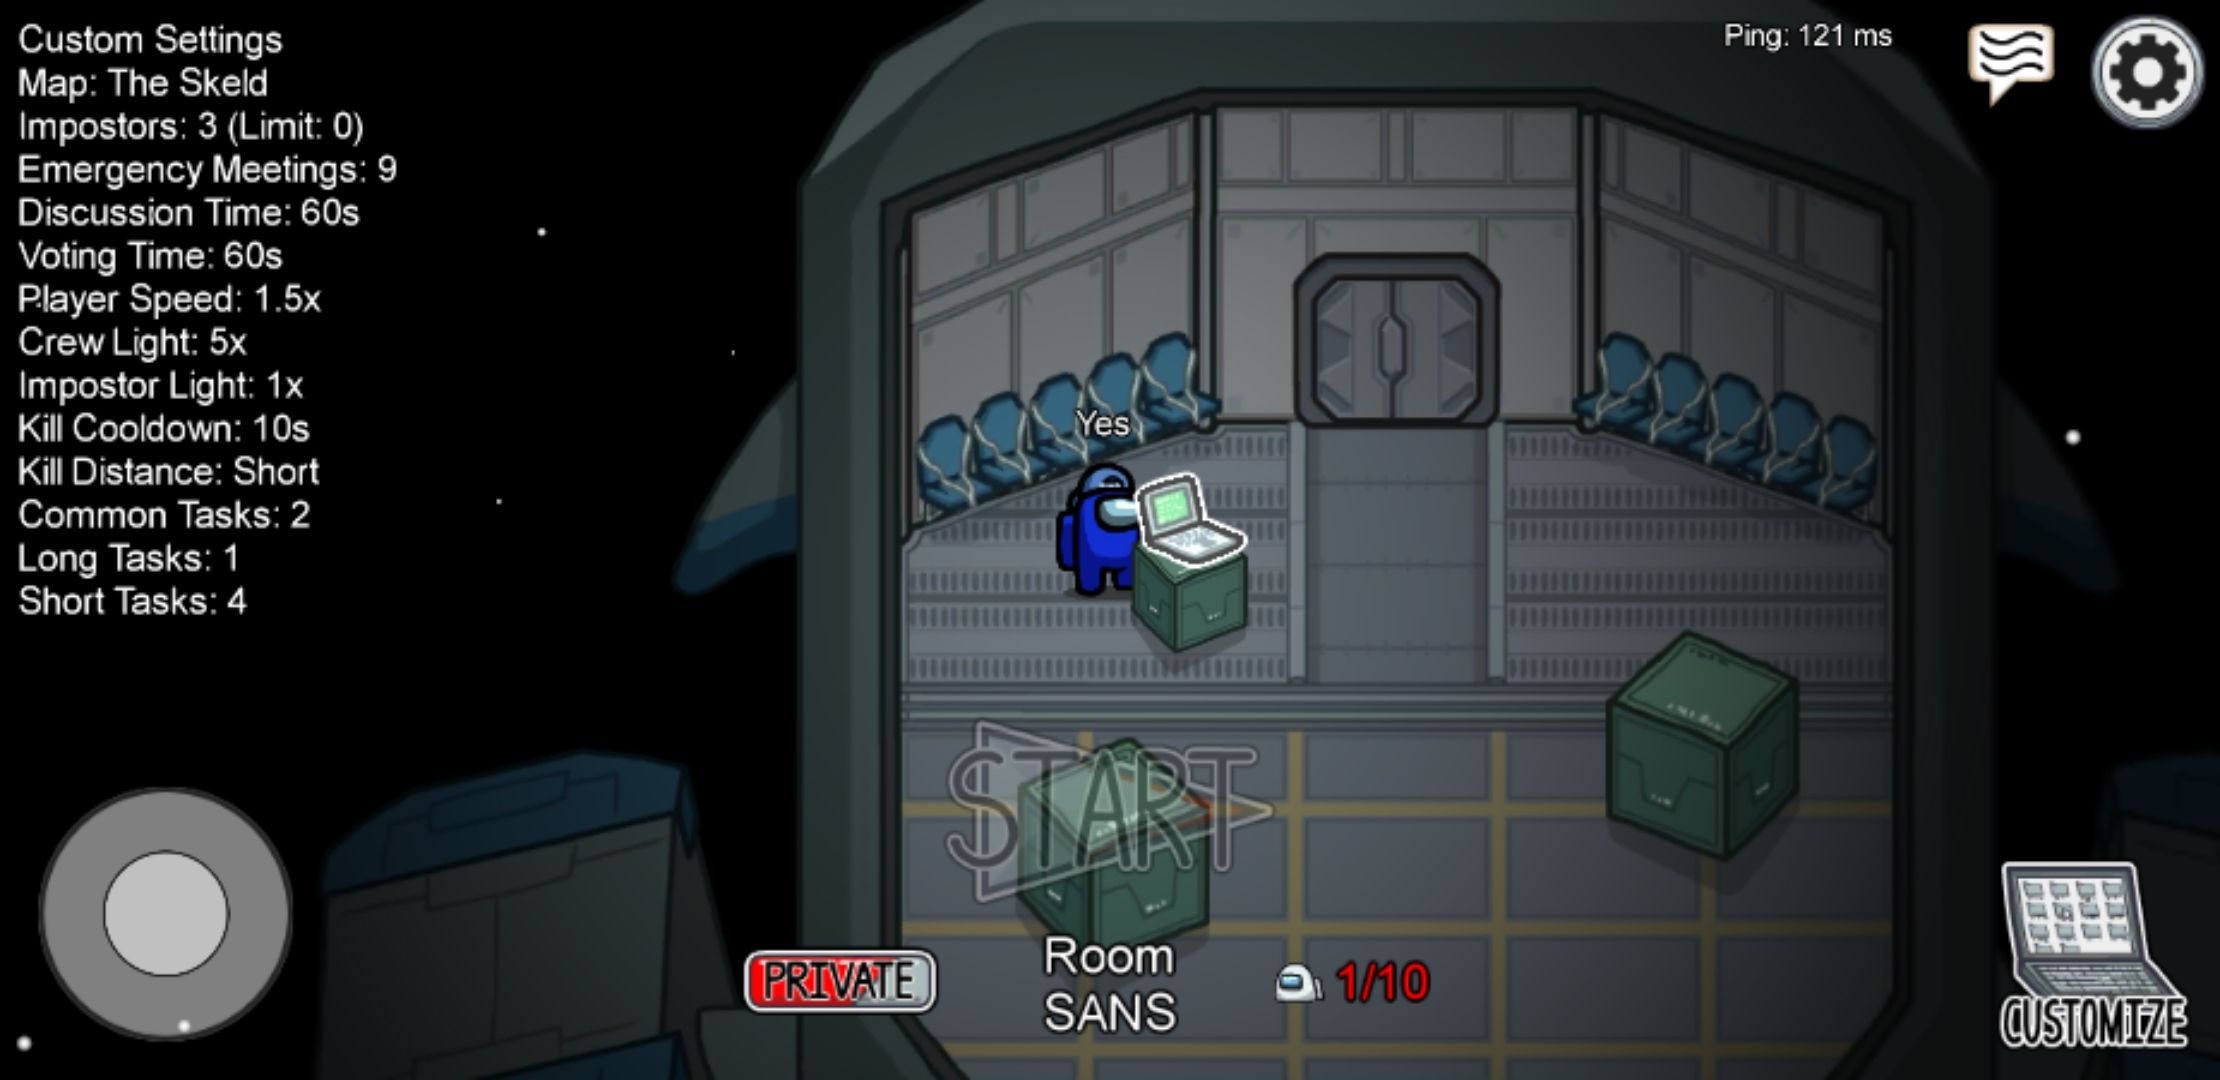 I haven't posted here in a while. Here's an epic room code